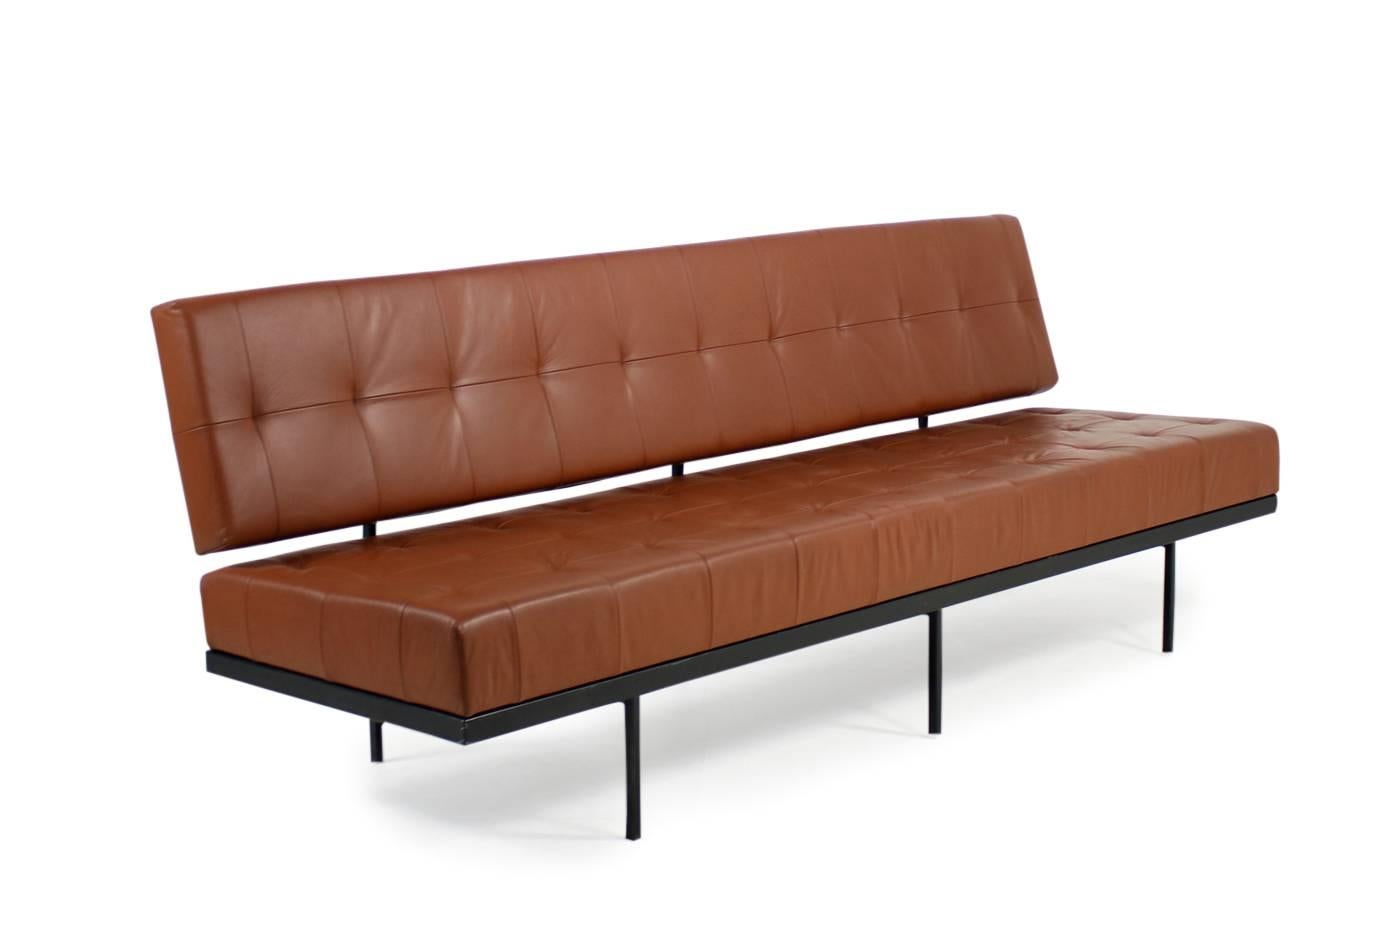 Beautiful 1960s daybed by Florence Knoll for Knoll International.
Cognac leather, metal frame in black, fantastic condition, upholstery is very good, the leather in a beautiful cognac tone. These sofas were mostly only made to order, so a very rare